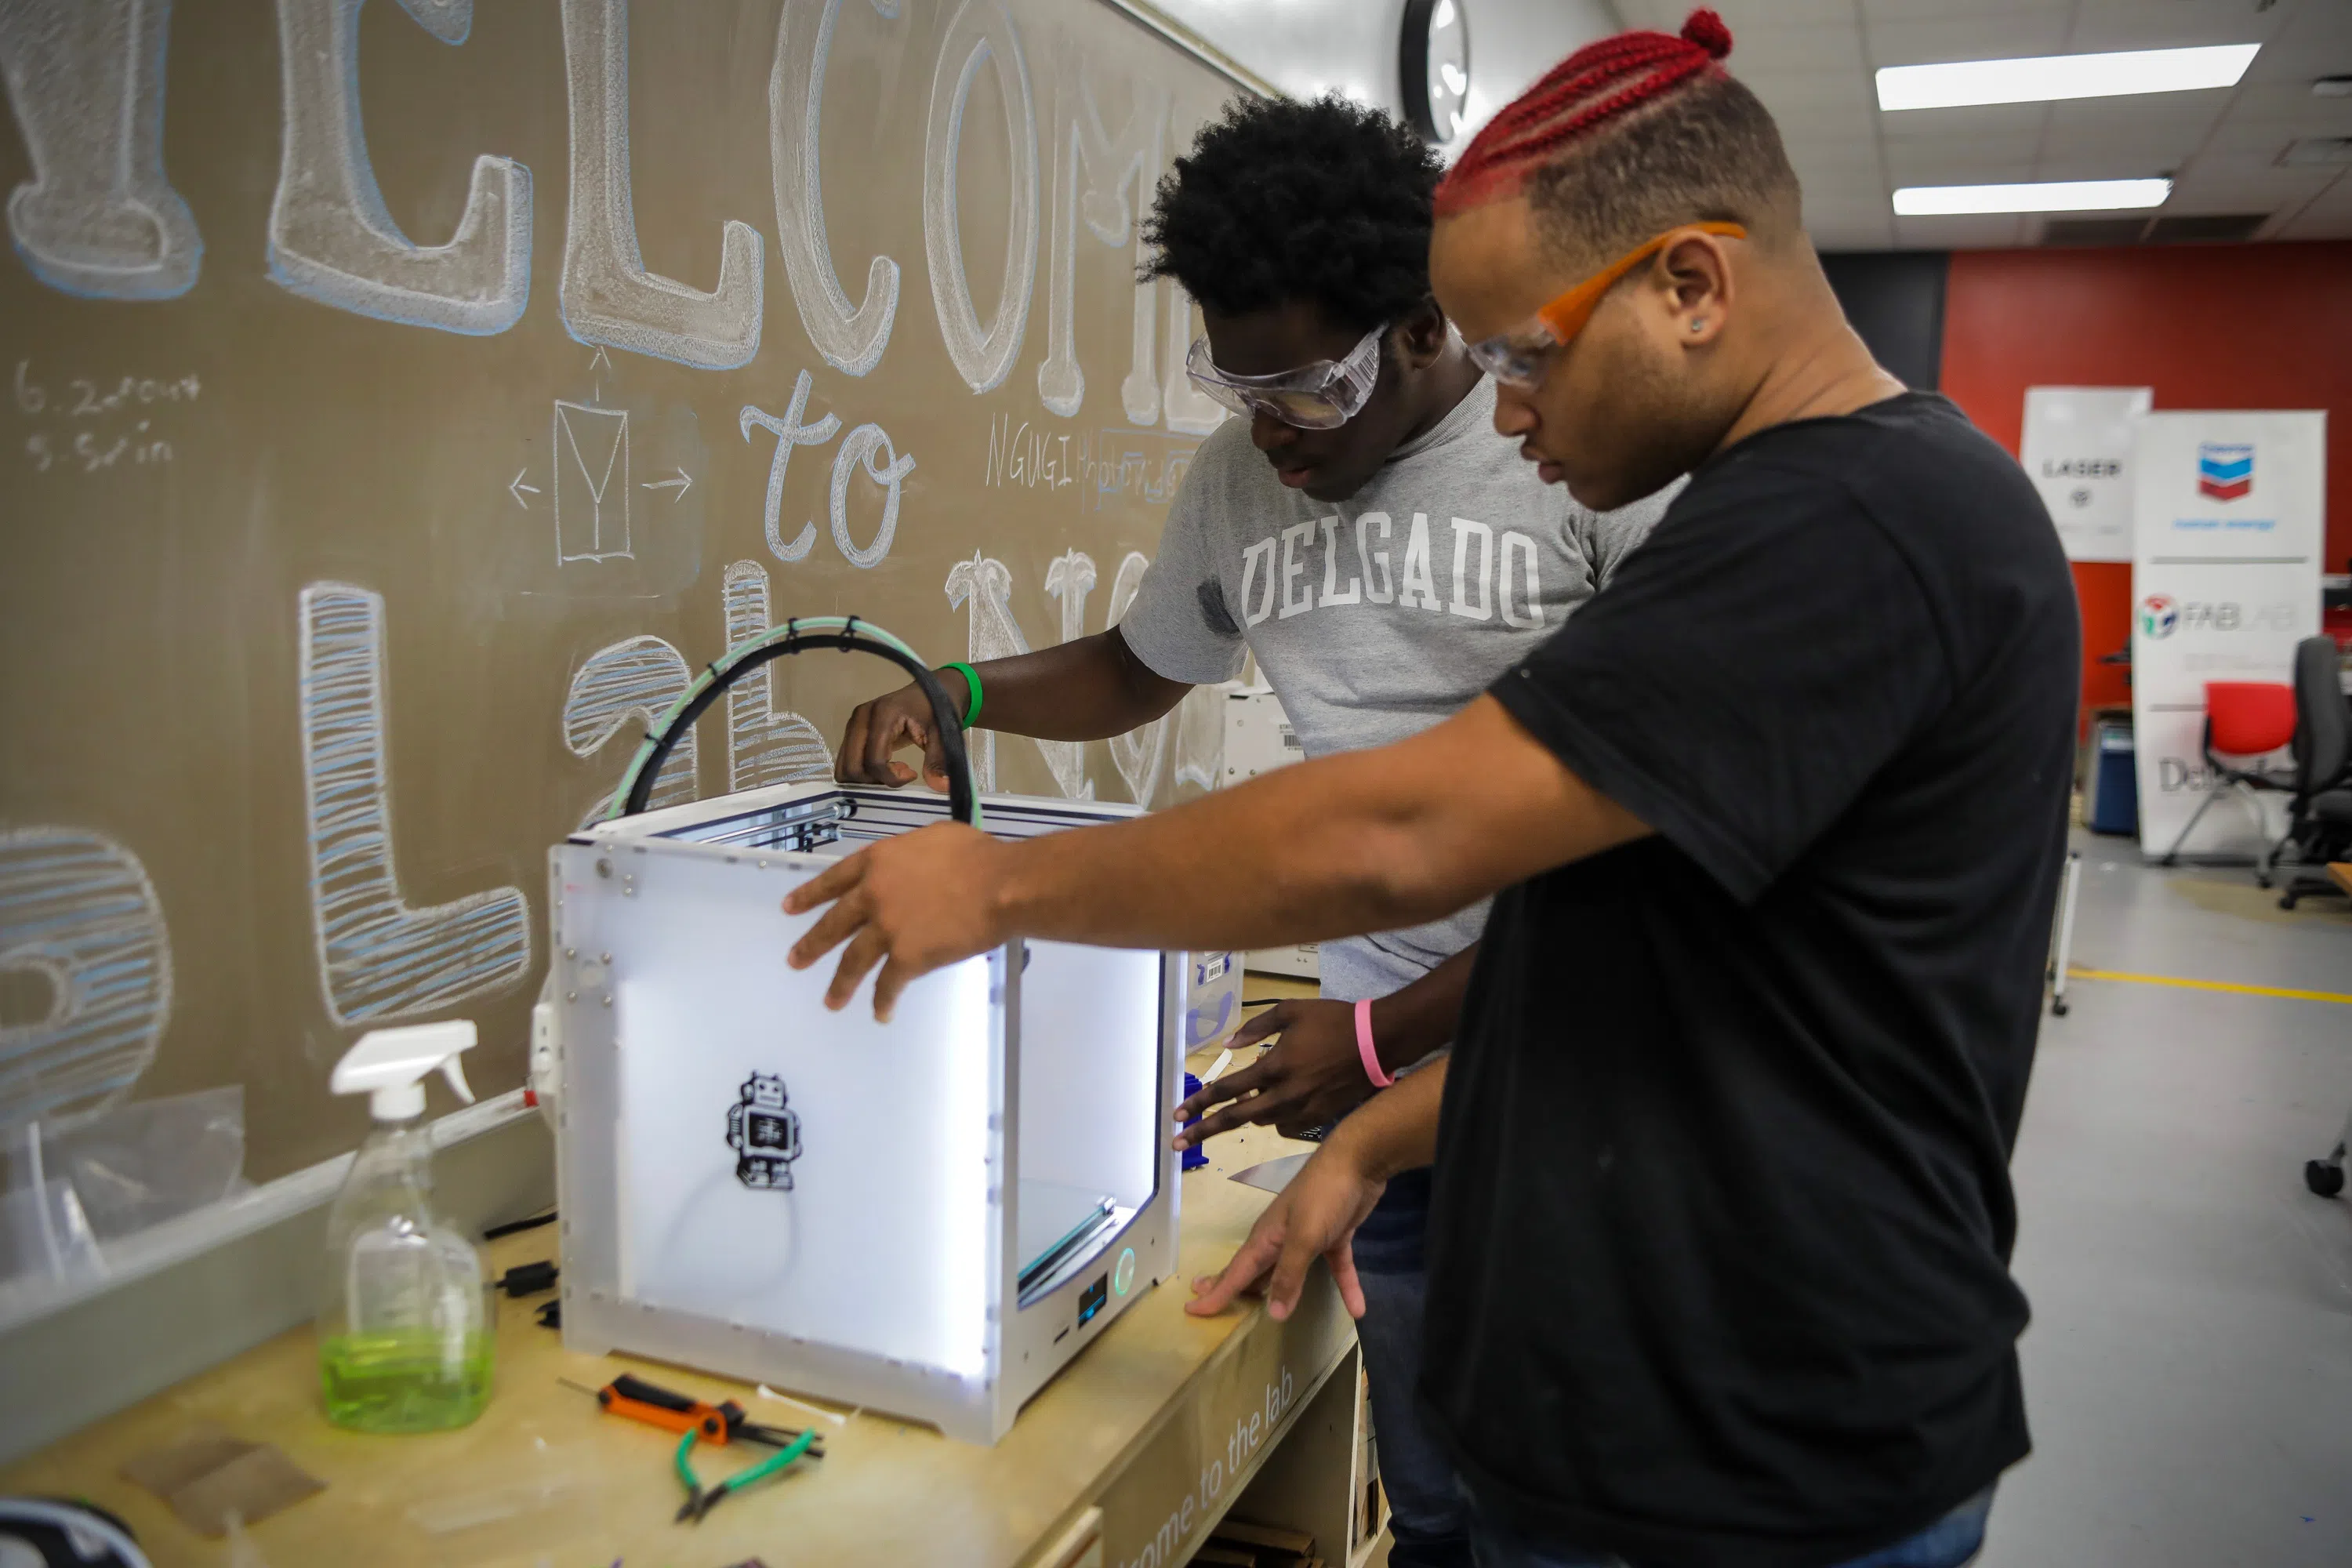 2 people working at a 3D printer